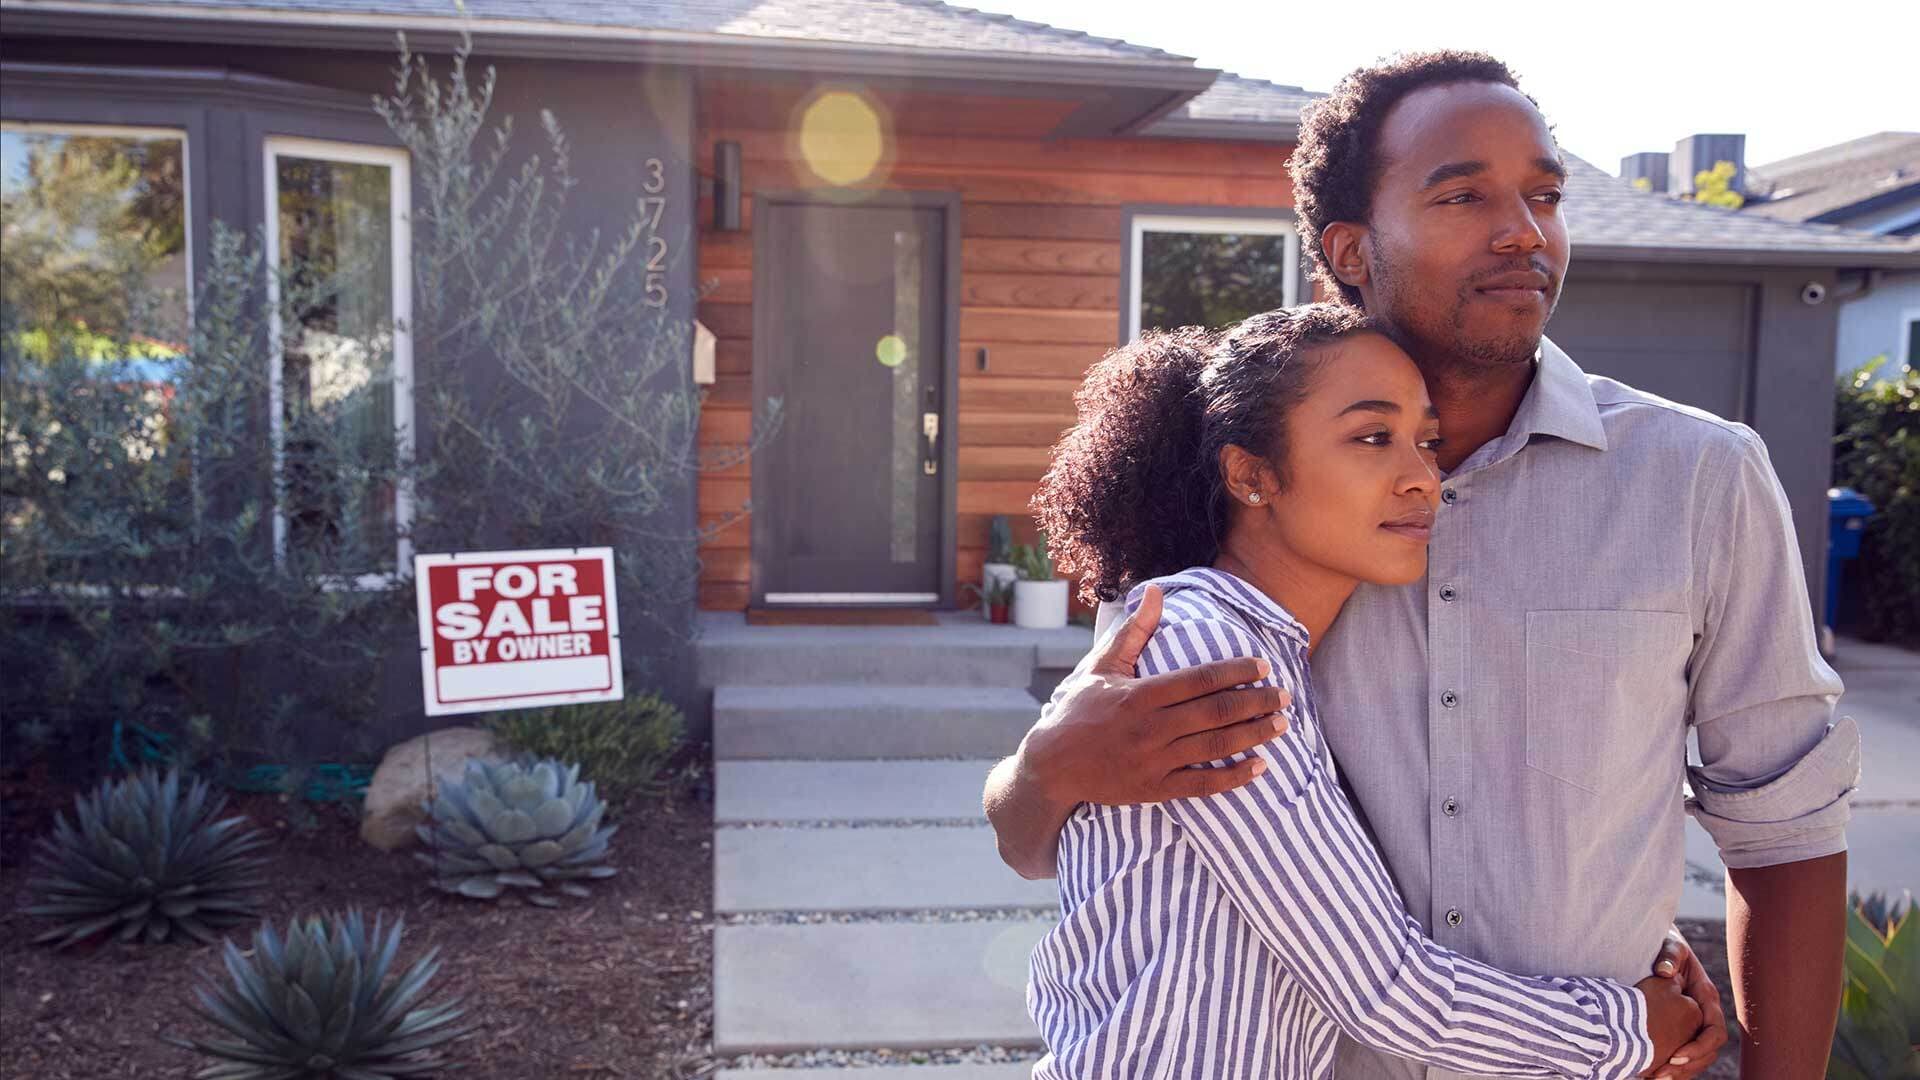 Couple in front of home with "for sale by owner" sign